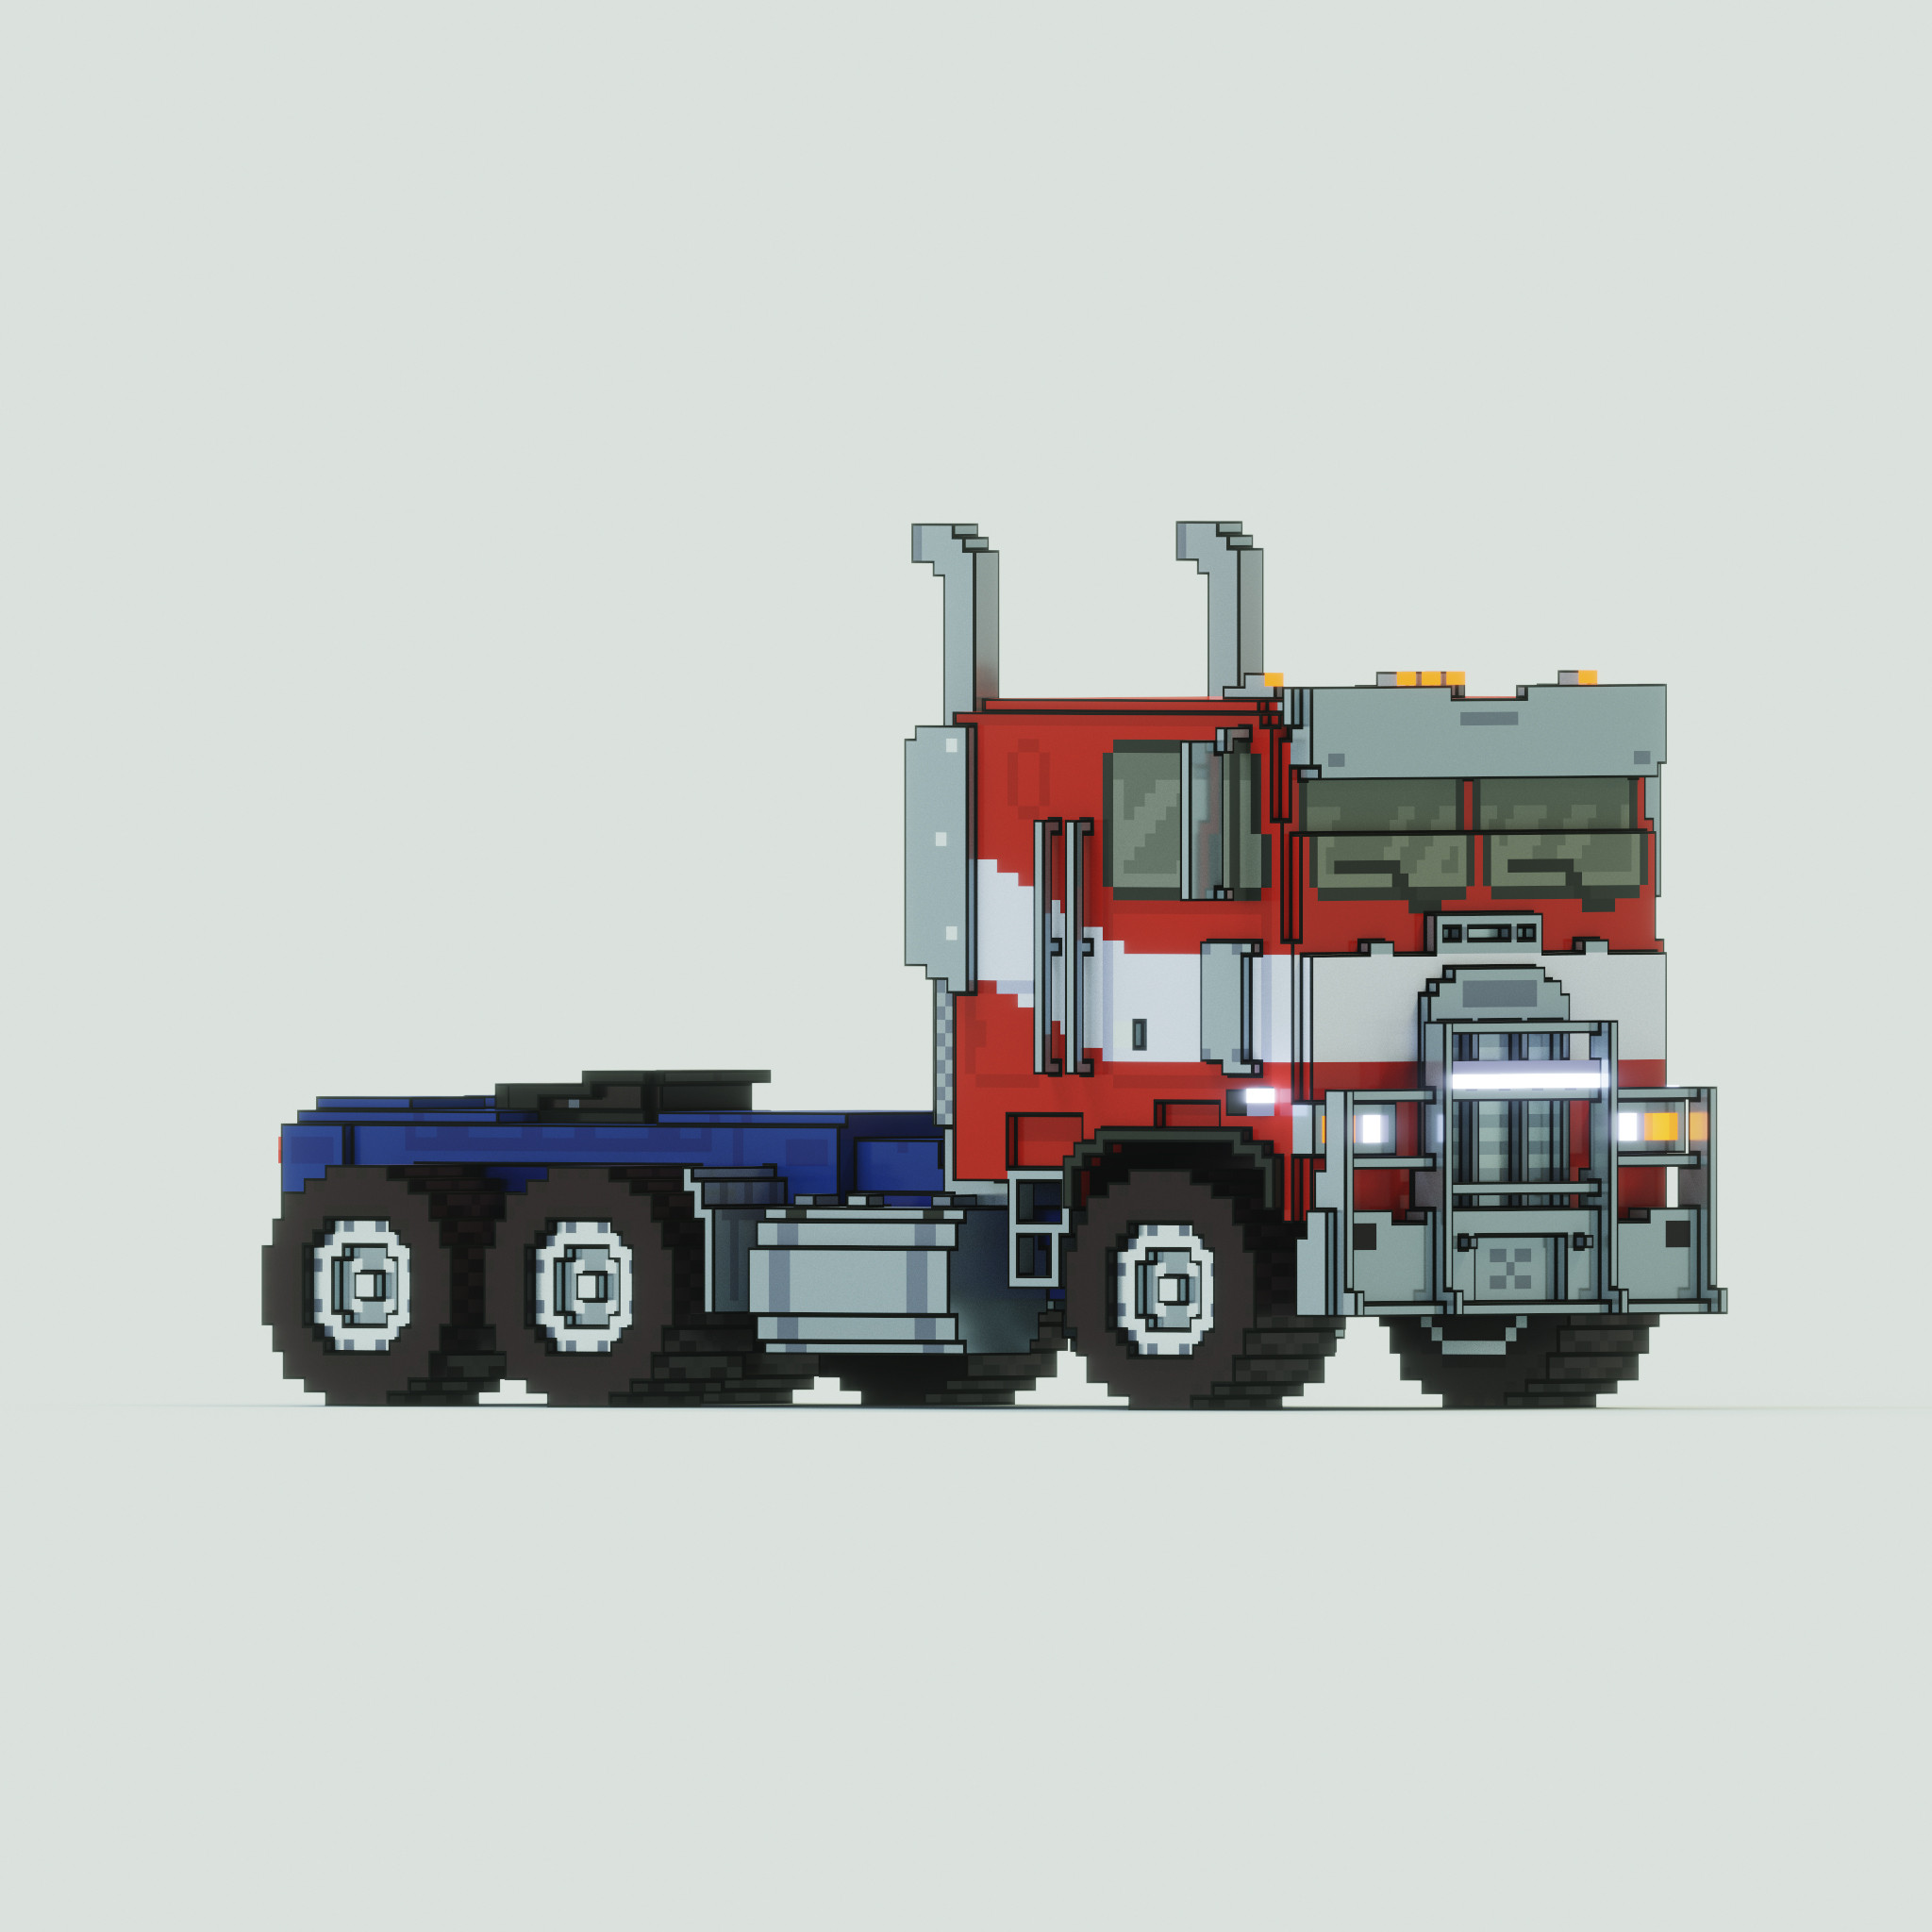 Optimus Prime's Disguise (Truck) Mode created and rendered using Magicavoxel software.